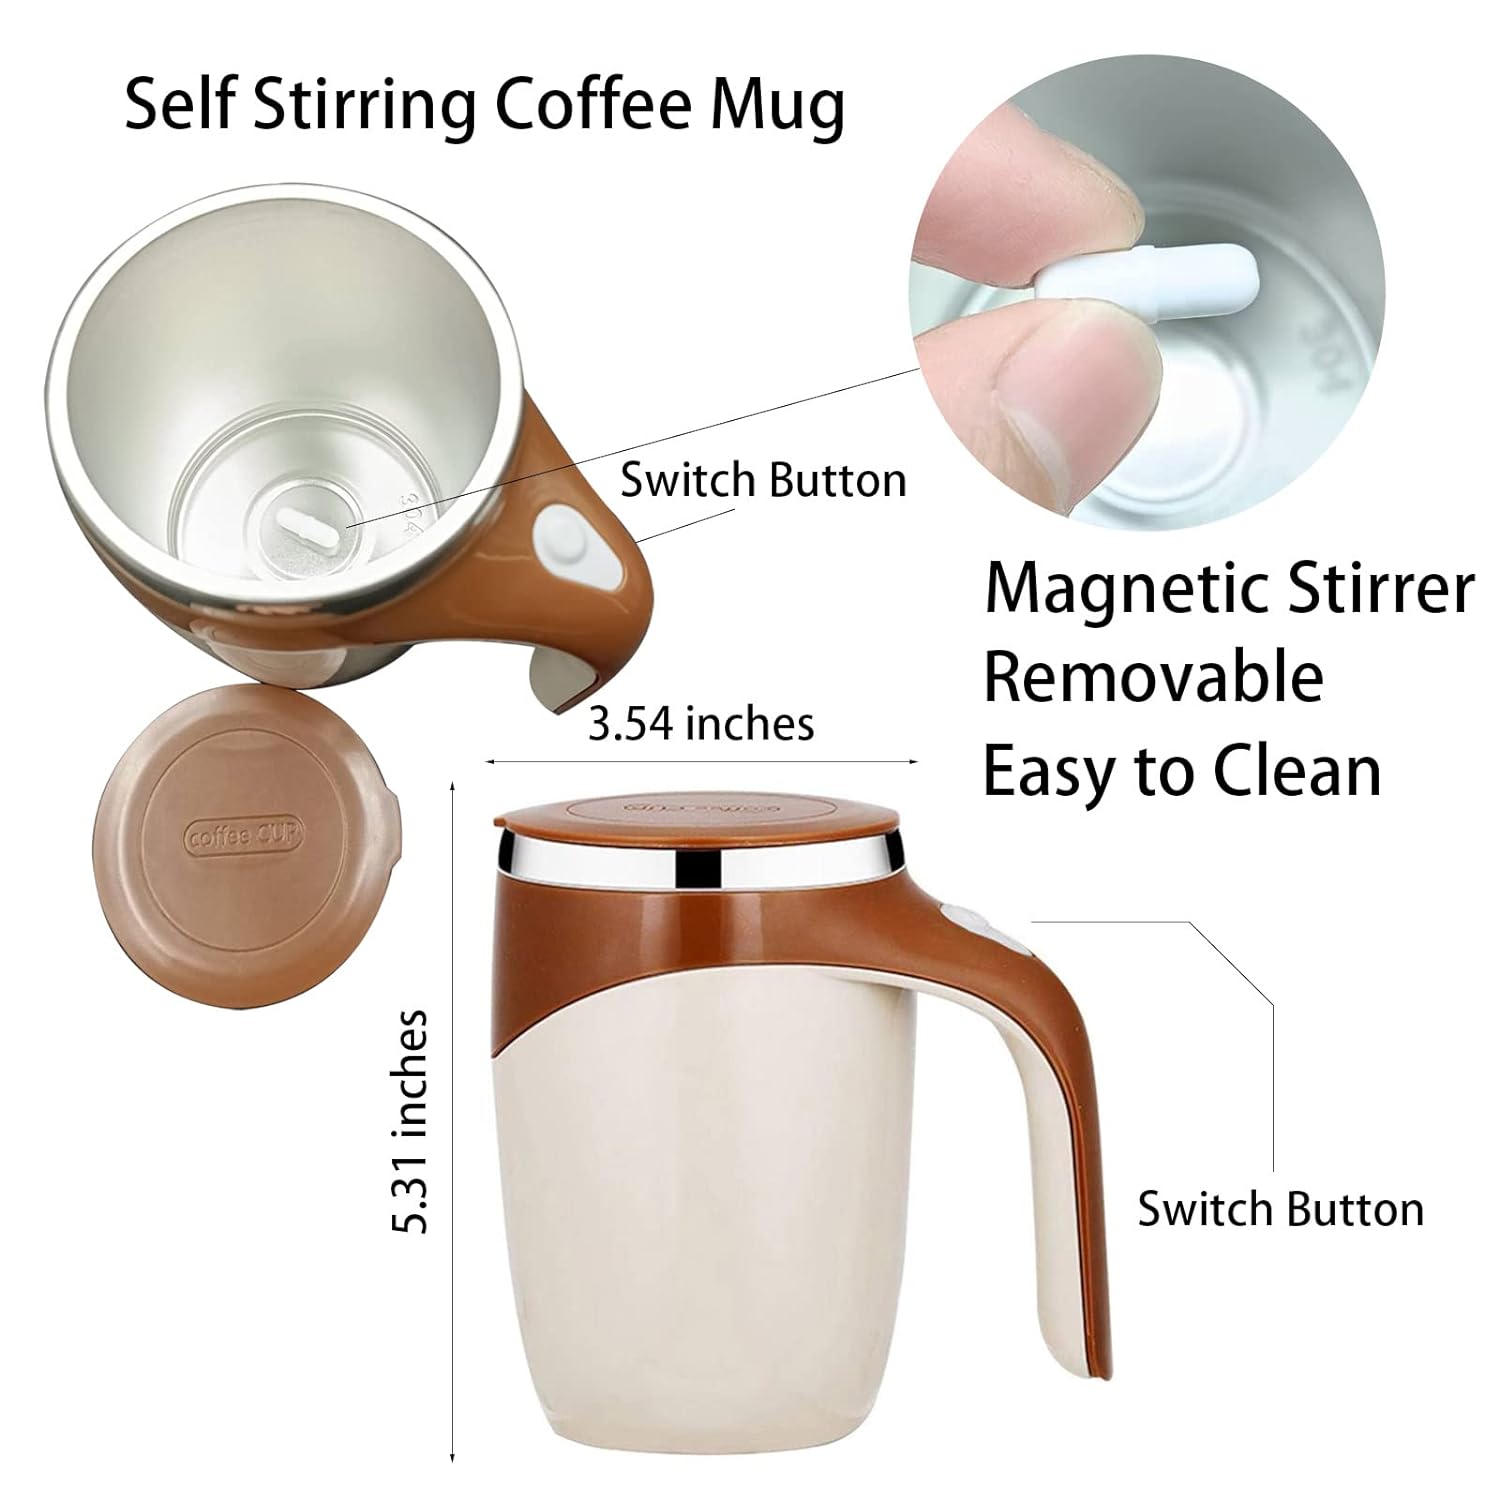 Automatic Magnetic Stirring Coffee Mug - Self-Mixing Stainless Steel Tumbler